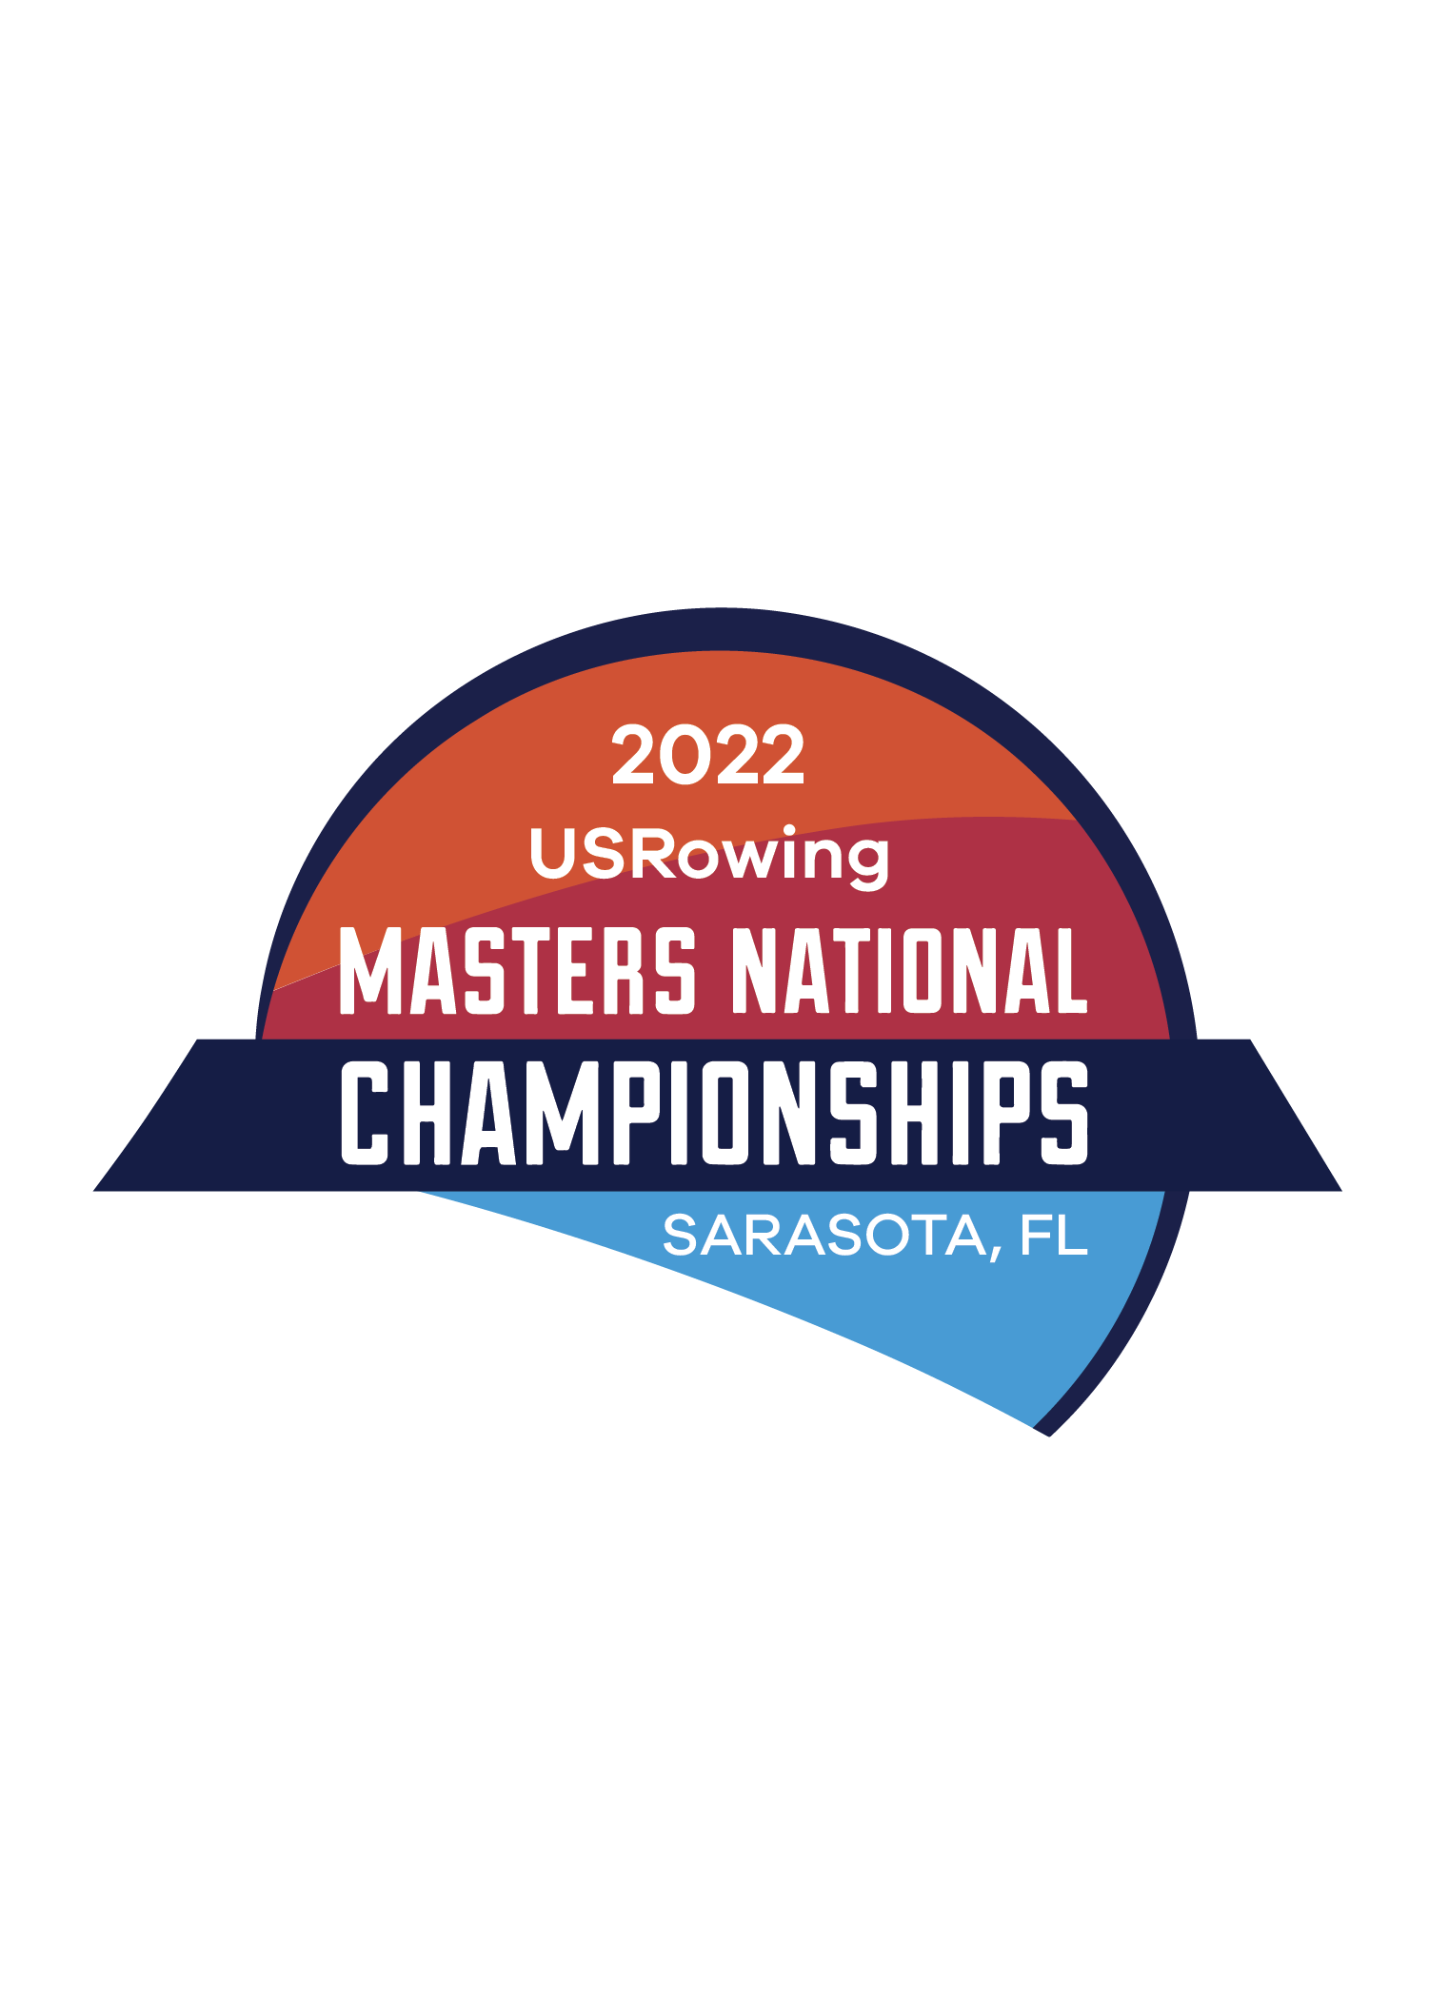 USRowing Masters National Championships Overview